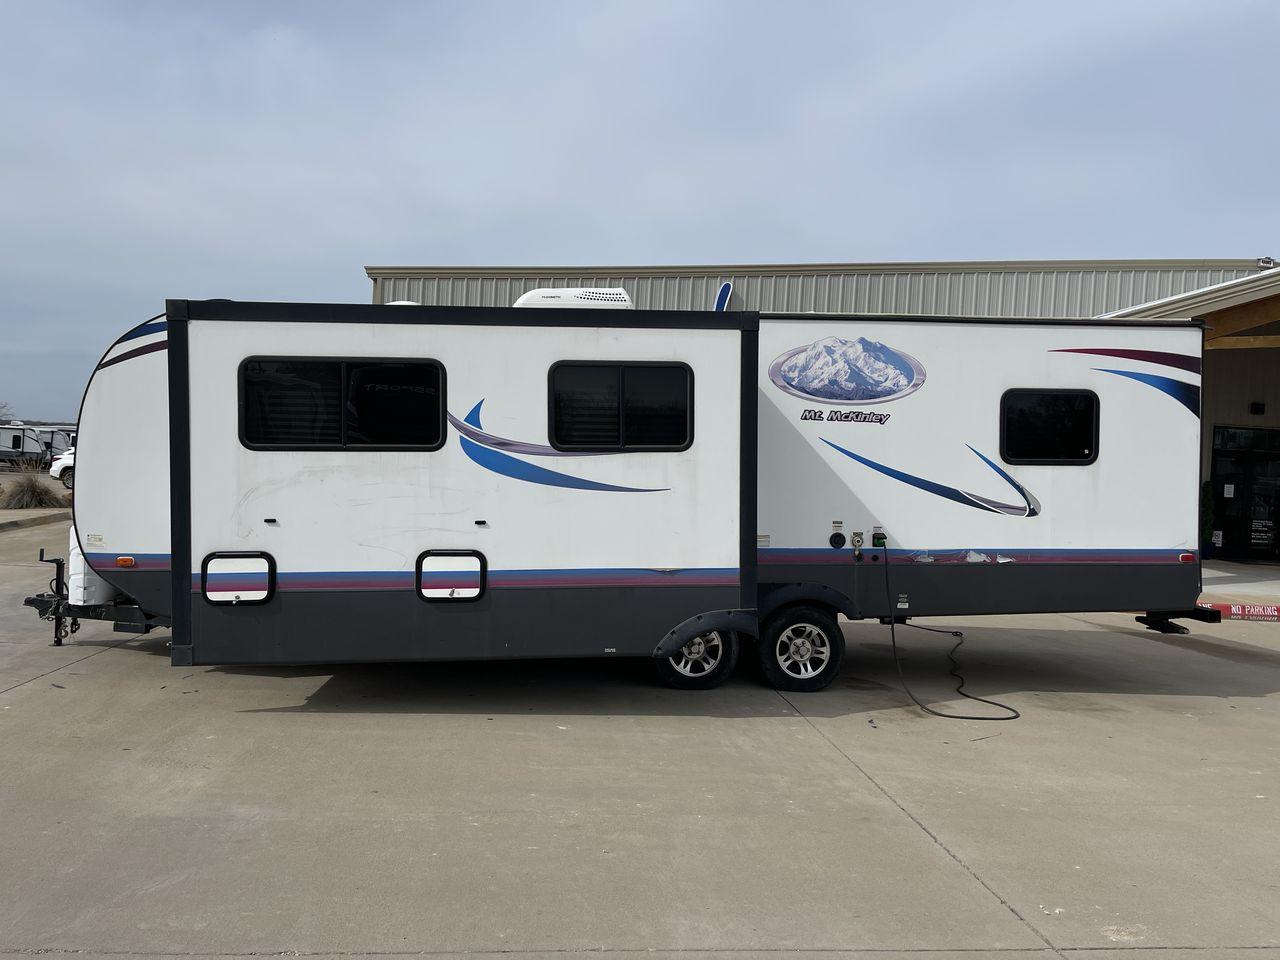 2018 WHITE MT MCKINLEY 830FK (59CCC3221JL) , Length: 32 ft | Dry Weight: 5,660 lbs. | Slides: 1 transmission, located at 4319 N Main St, Cleburne, TX, 76033, (817) 678-5133, 32.385960, -97.391212 - Take the 2018 Mt. McKinley 830FK Travel Trailer on your upcoming journey. This travel trailer provides a well-thought-out living area for your outdoor adventures, all while being tailored for comfort and convenience. This unit measures 32 ft in length by 8 ft in width. It has a dry weight of 5,66 - Photo #21